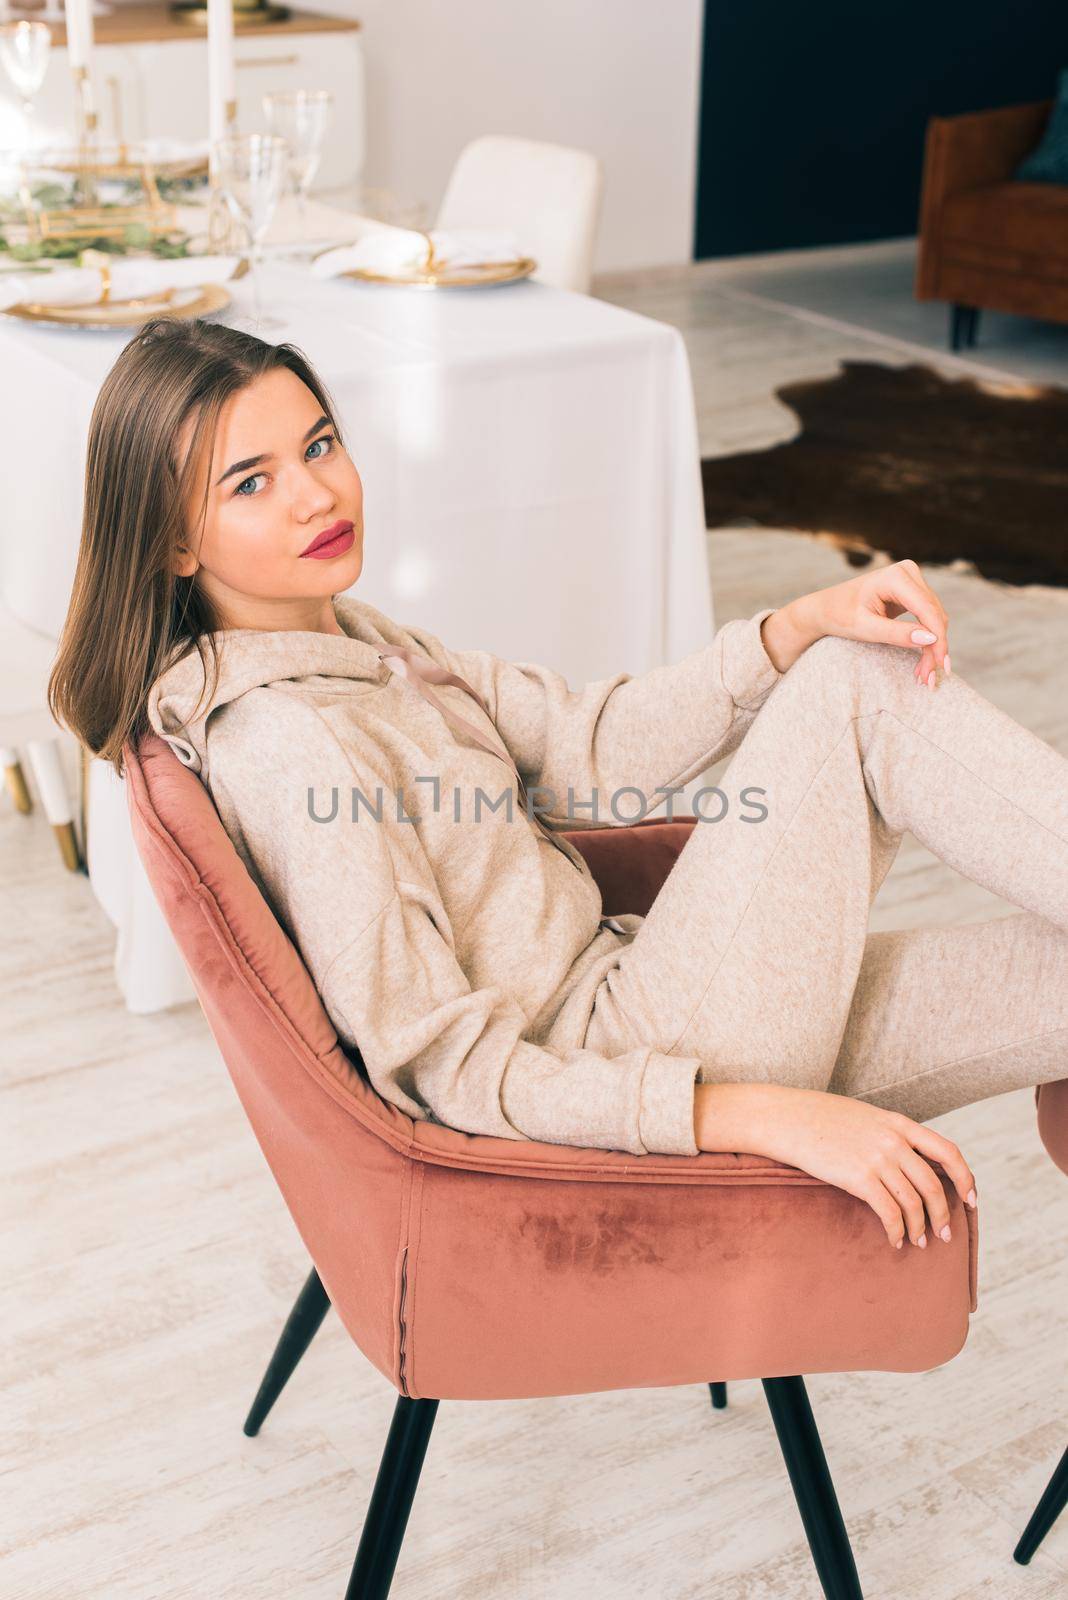 photo of a women in beige sports suit posing in the chair on a kitchen . selective focus by Ashtray25